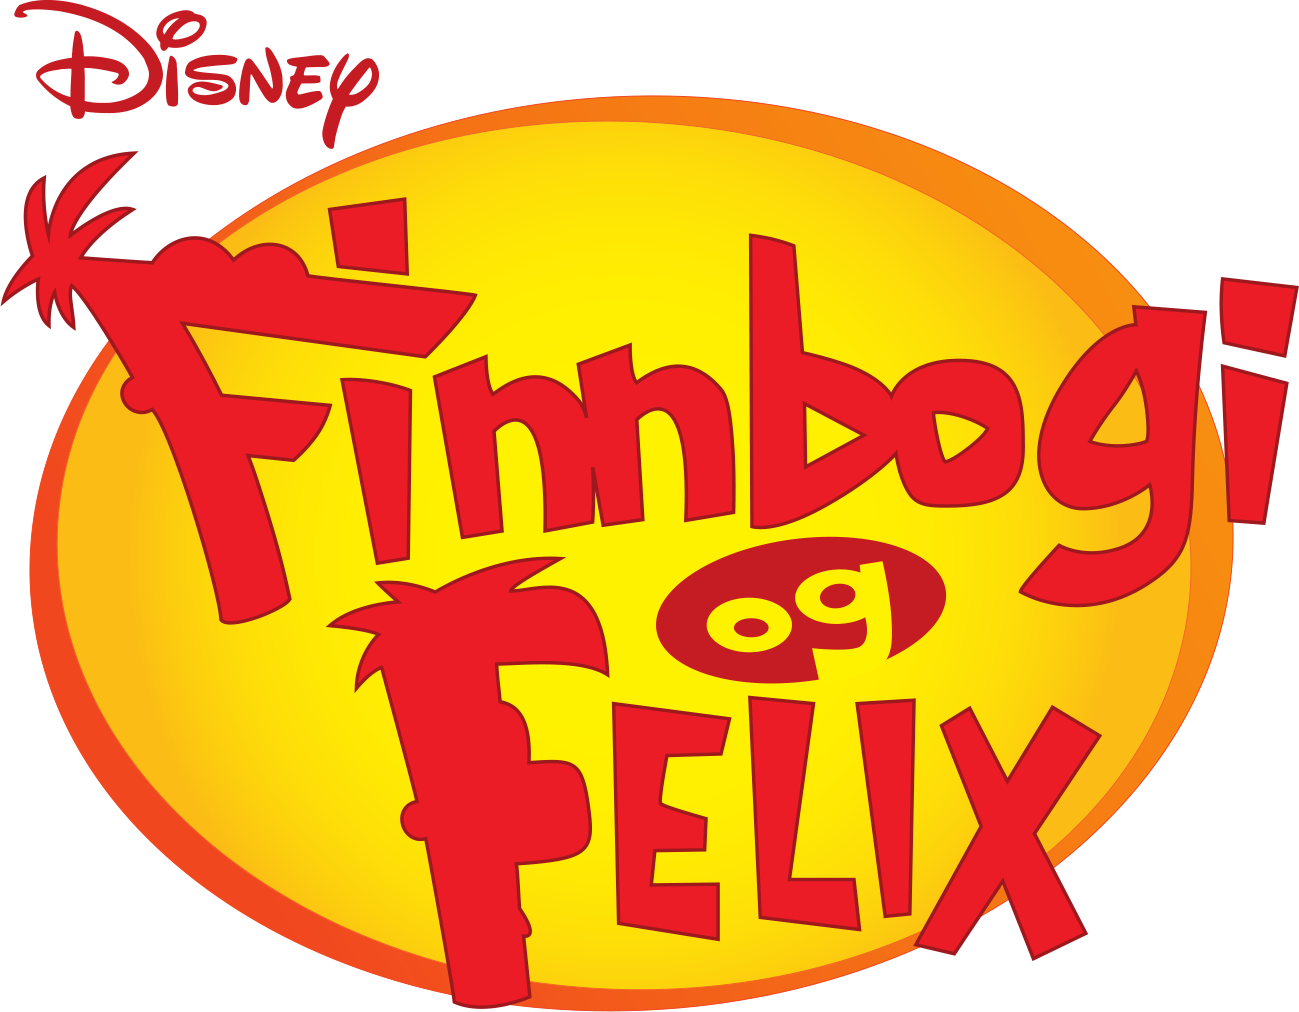 Image, Phineas and Ferb, logo (Icelandic).png.